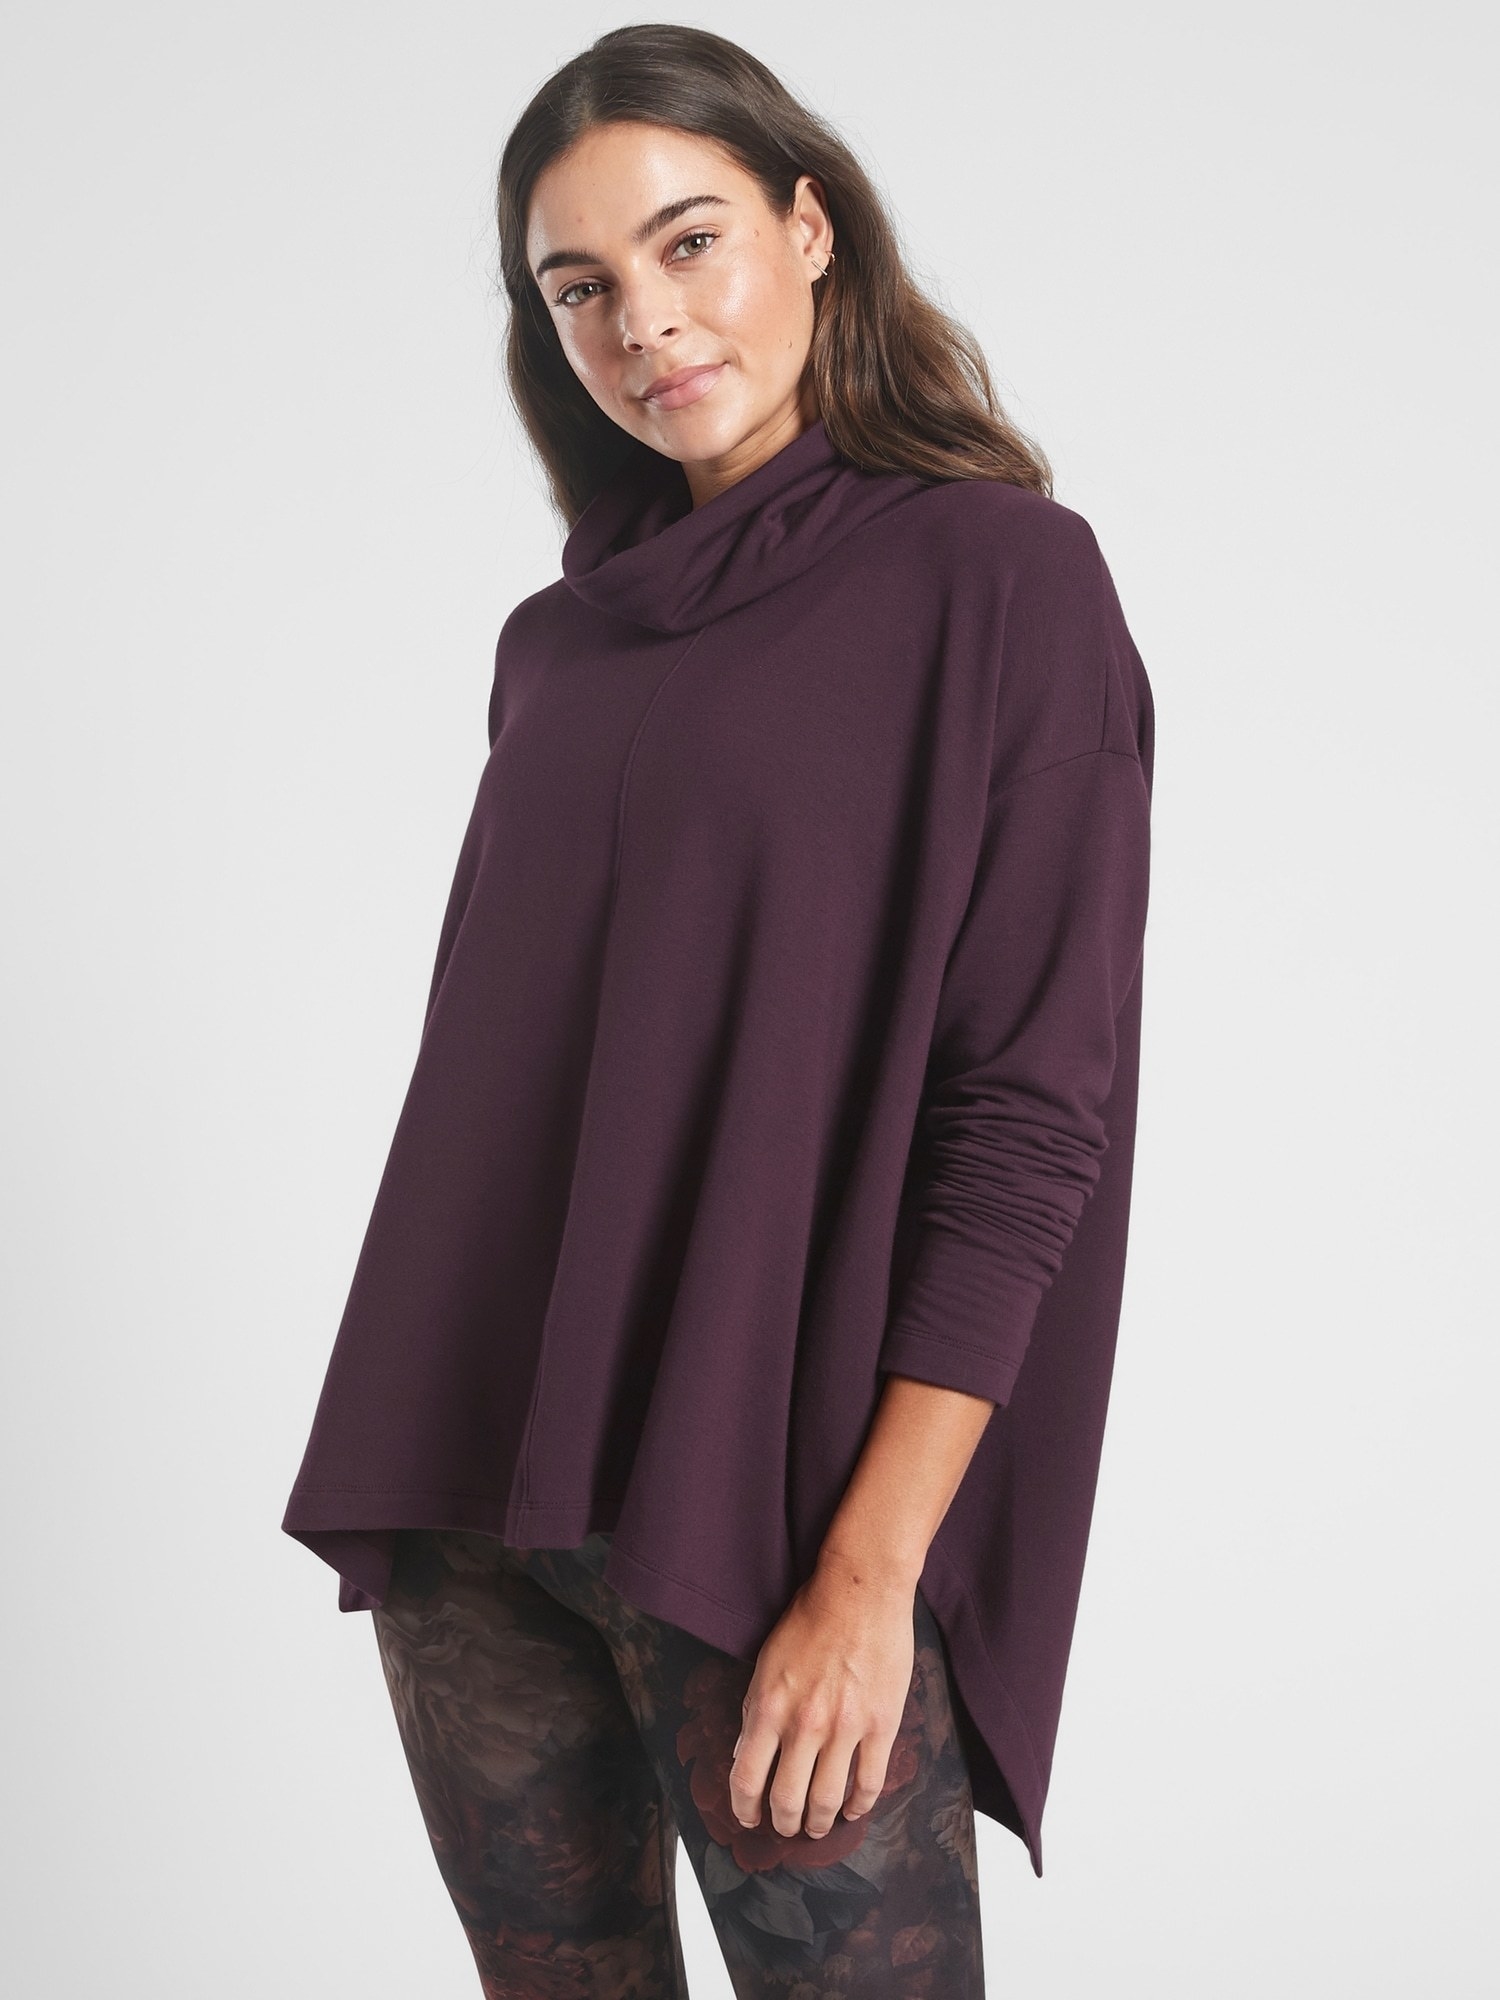 Highly-Rated Things From Athleta Worth Checking Out